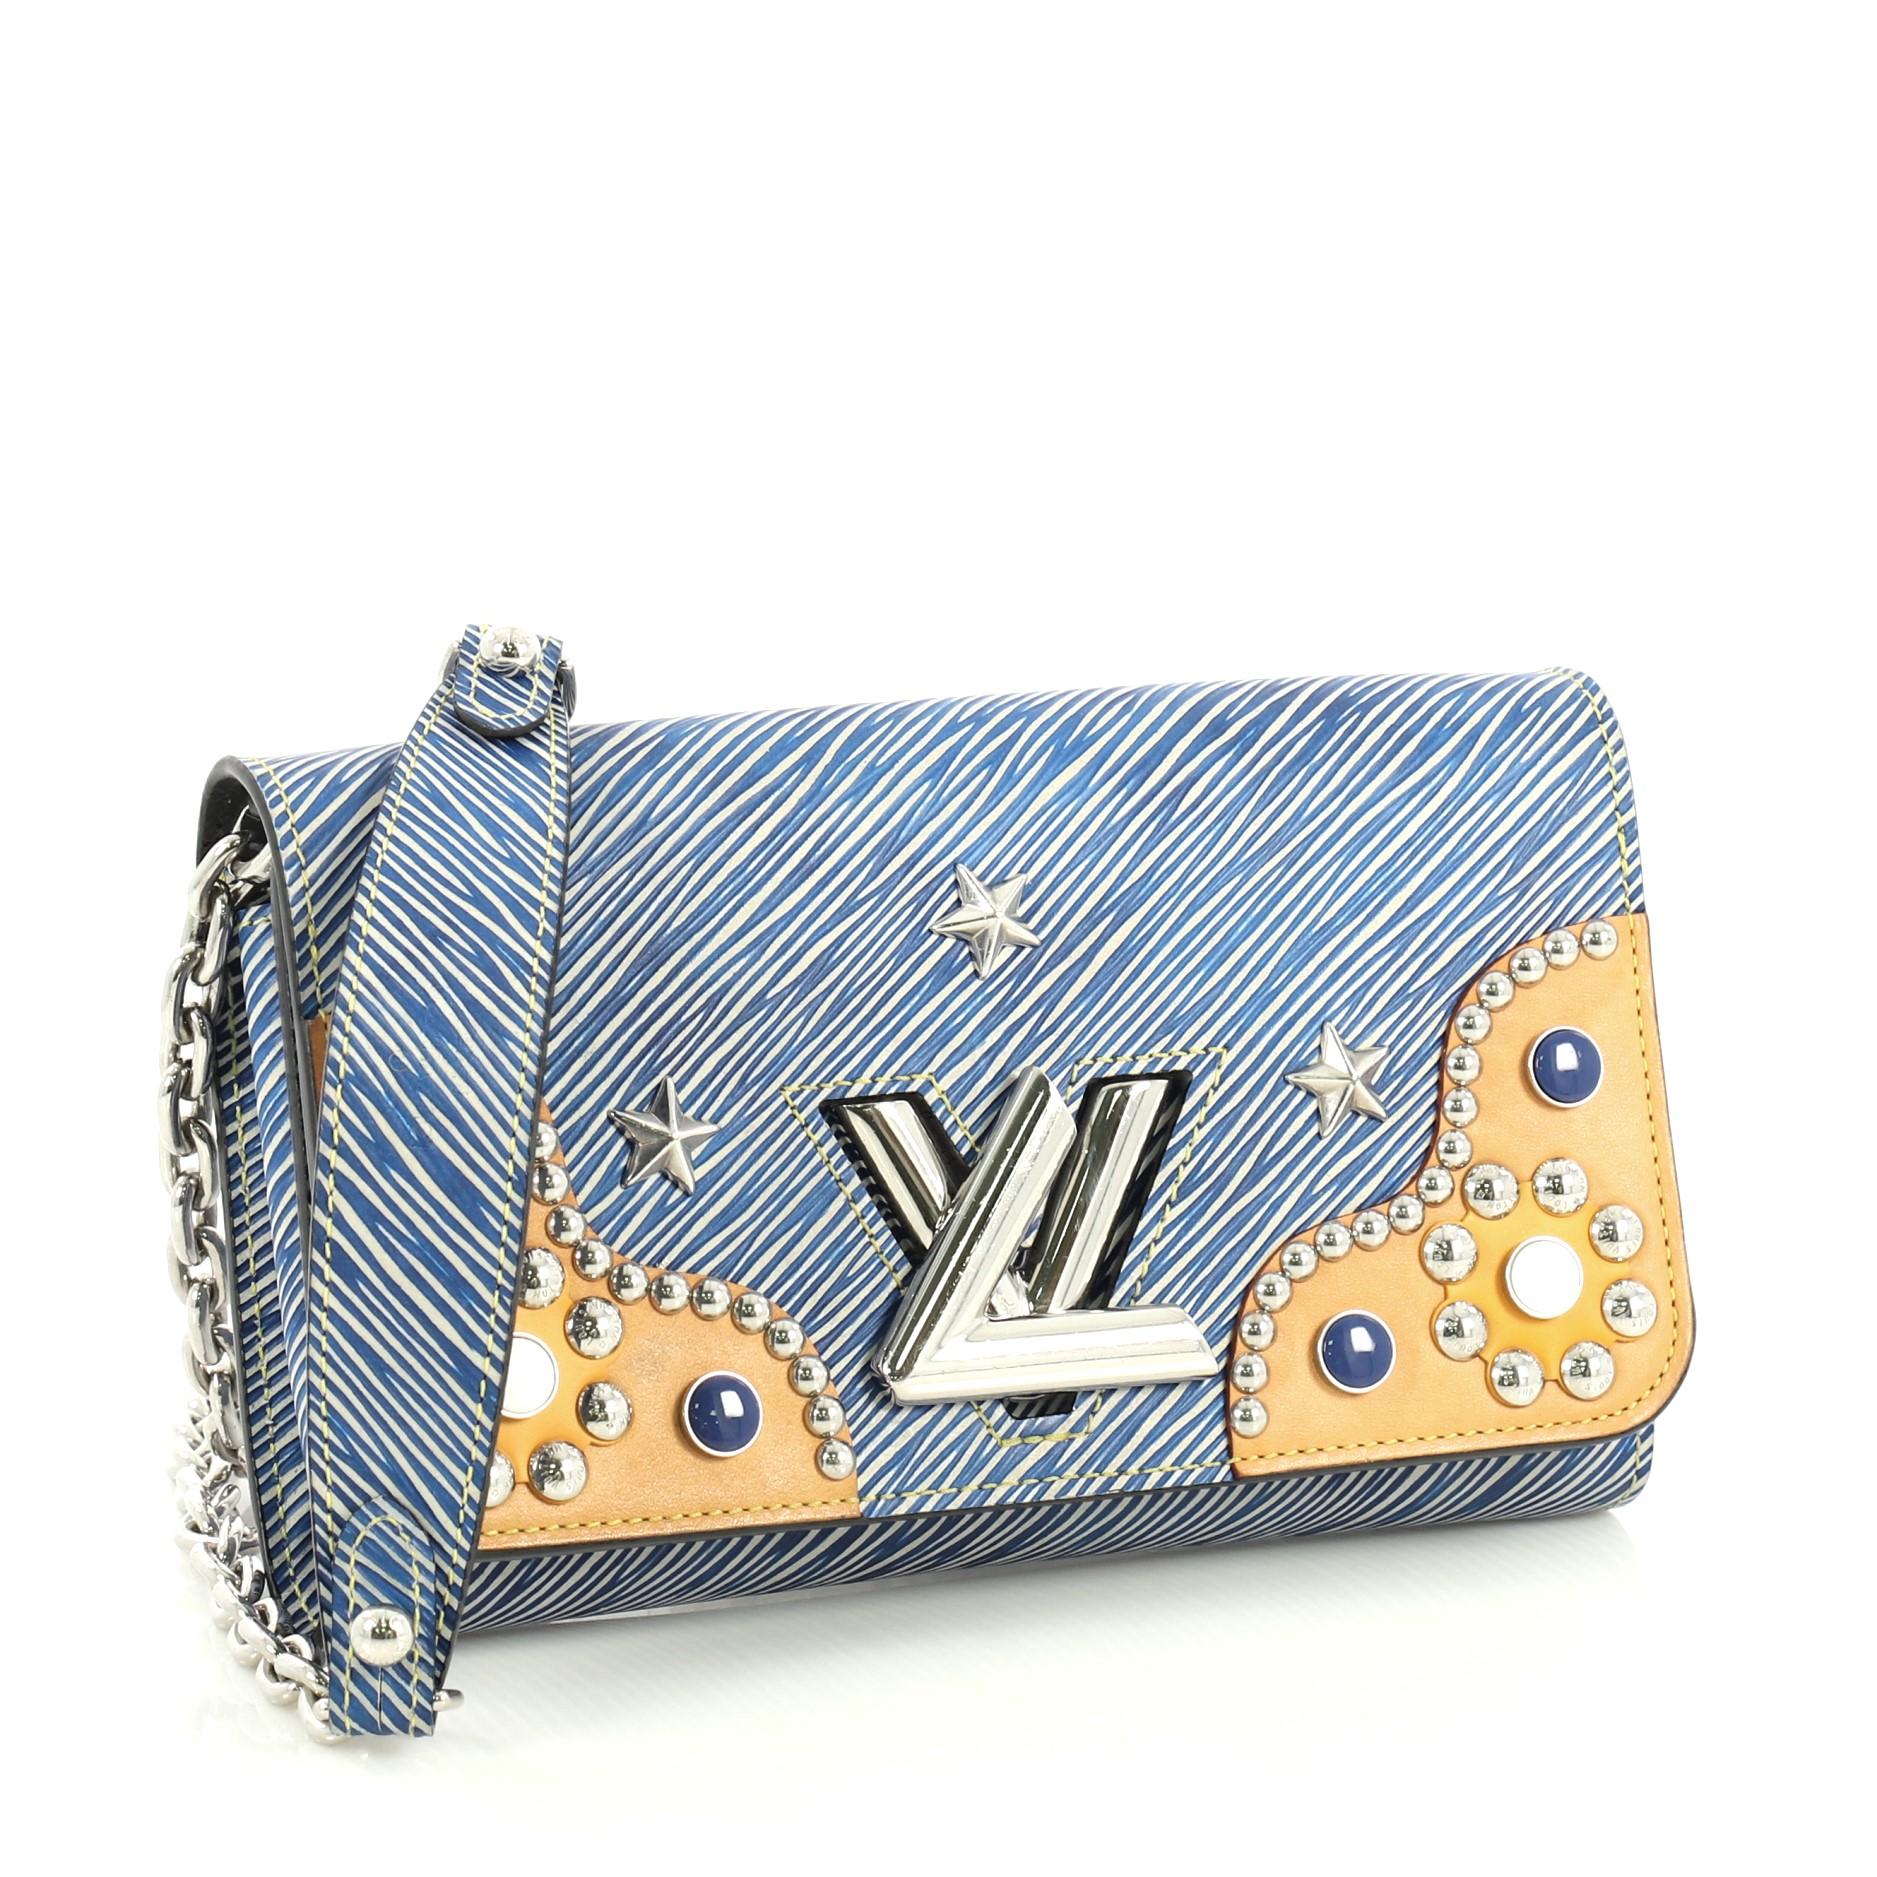 This Louis Vuitton Twist Chain Wallet Studded Epi Leather, crafted from blue epi leather, features chain link strap, stud detailing and silver-tone hardware. Its flap with twist lock closure opens to a black leather interior with zip pocket and